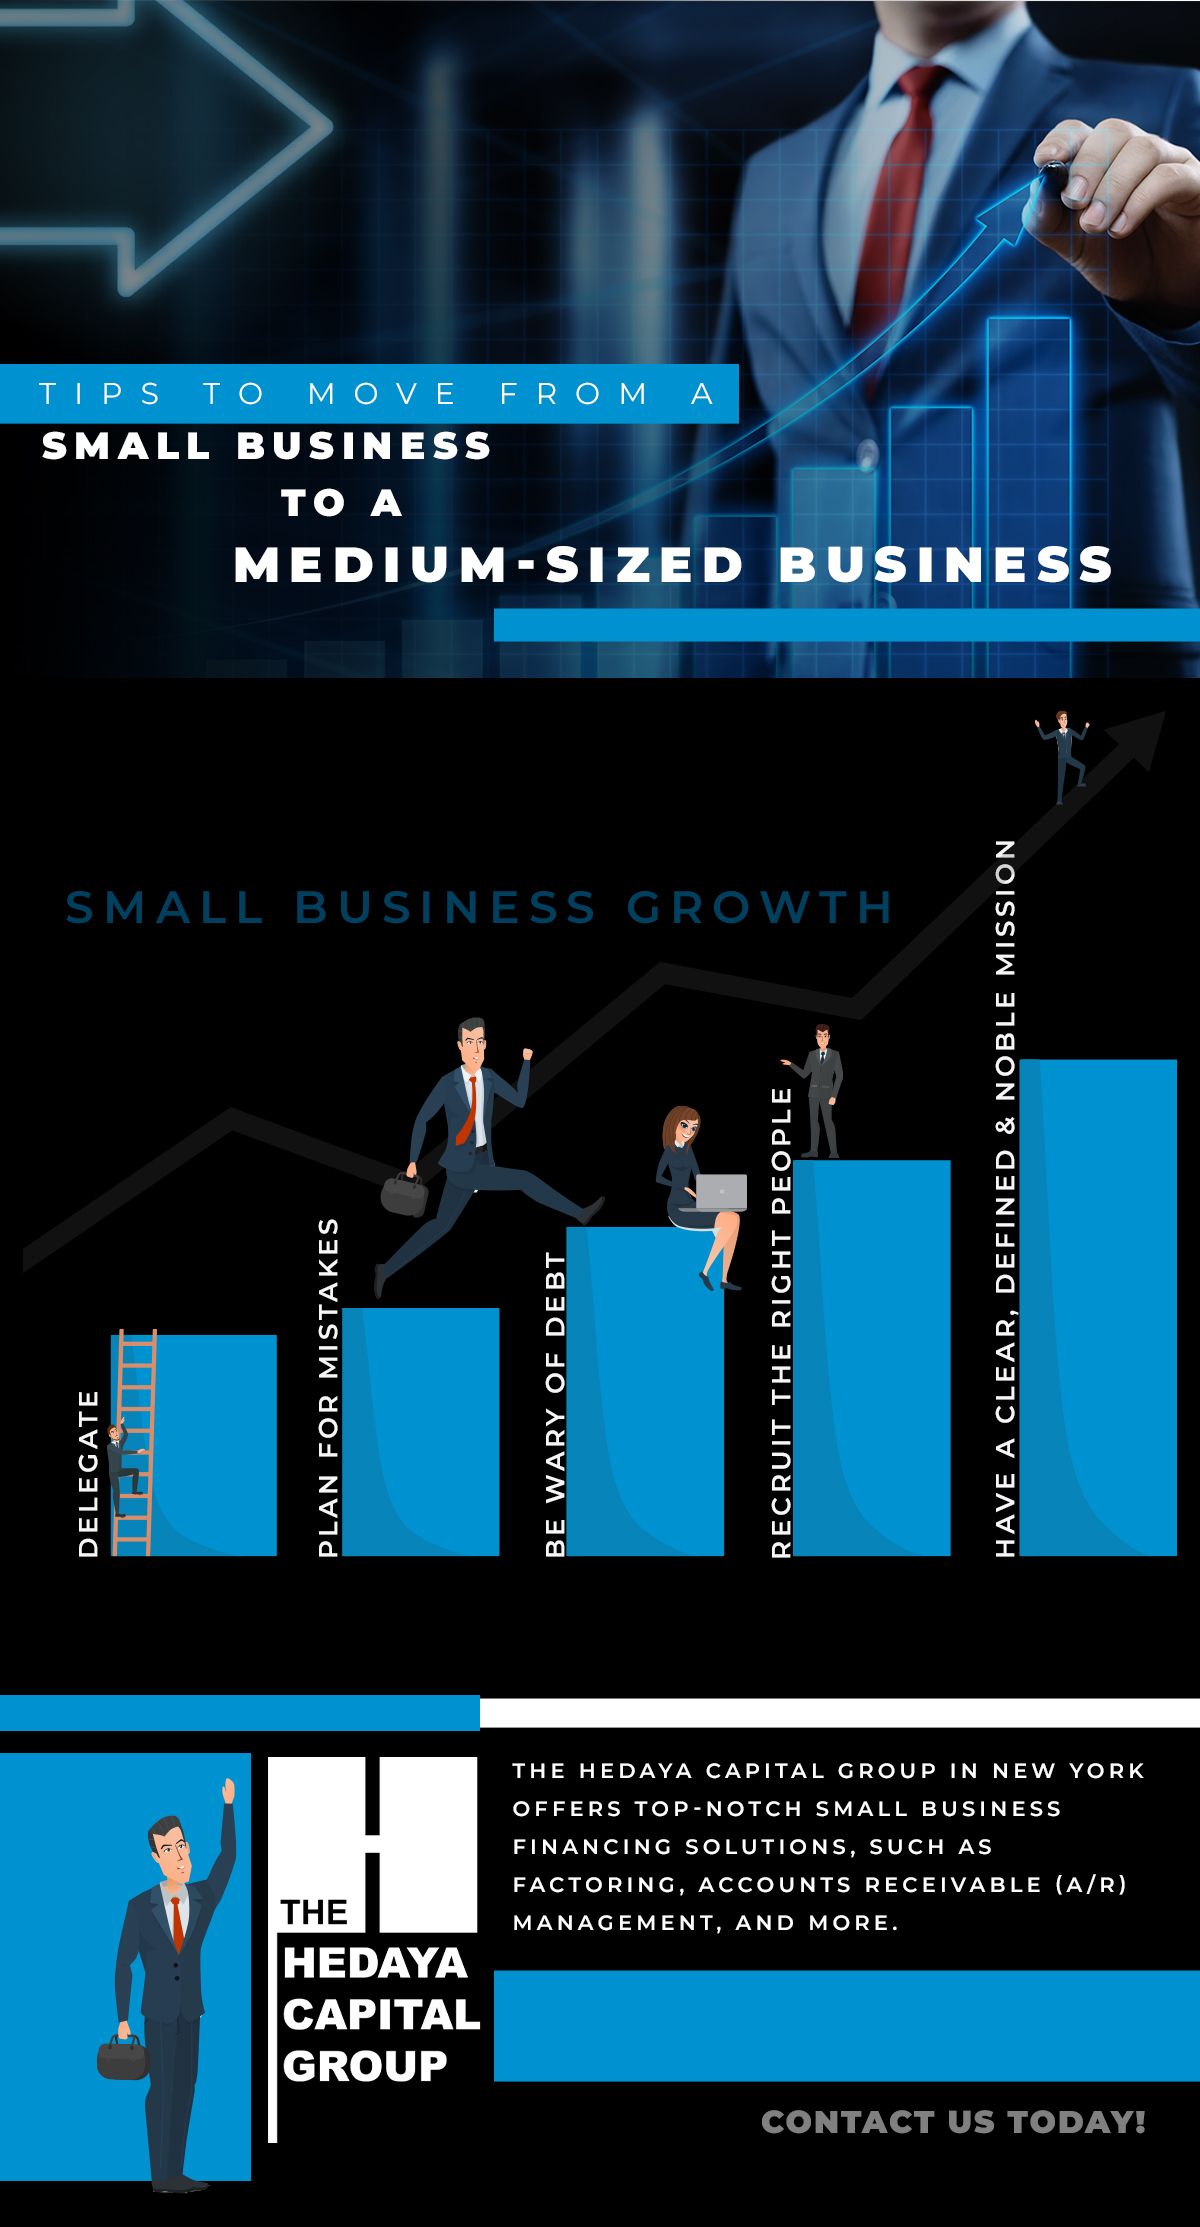 TIPS TO MOVE FROM A SMALL BUSINESS TO A MEDIUM-SIZED BUSINESS infographic